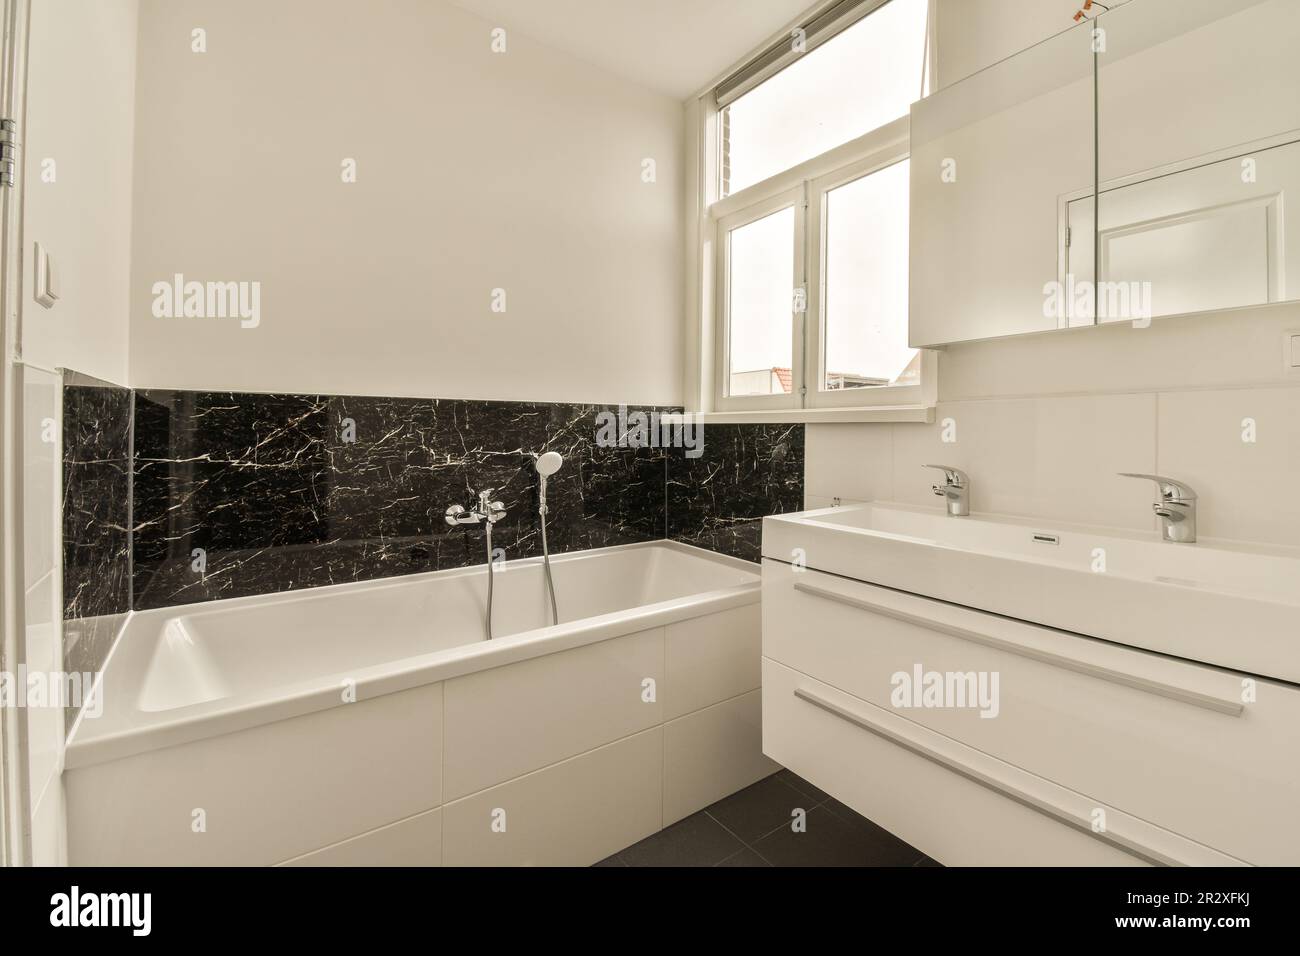 https://c8.alamy.com/comp/2R2XFKJ/a-modern-bathroom-with-black-and-white-marble-tiles-on-the-walls-tub-sink-and-mirror-in-it-2R2XFKJ.jpg